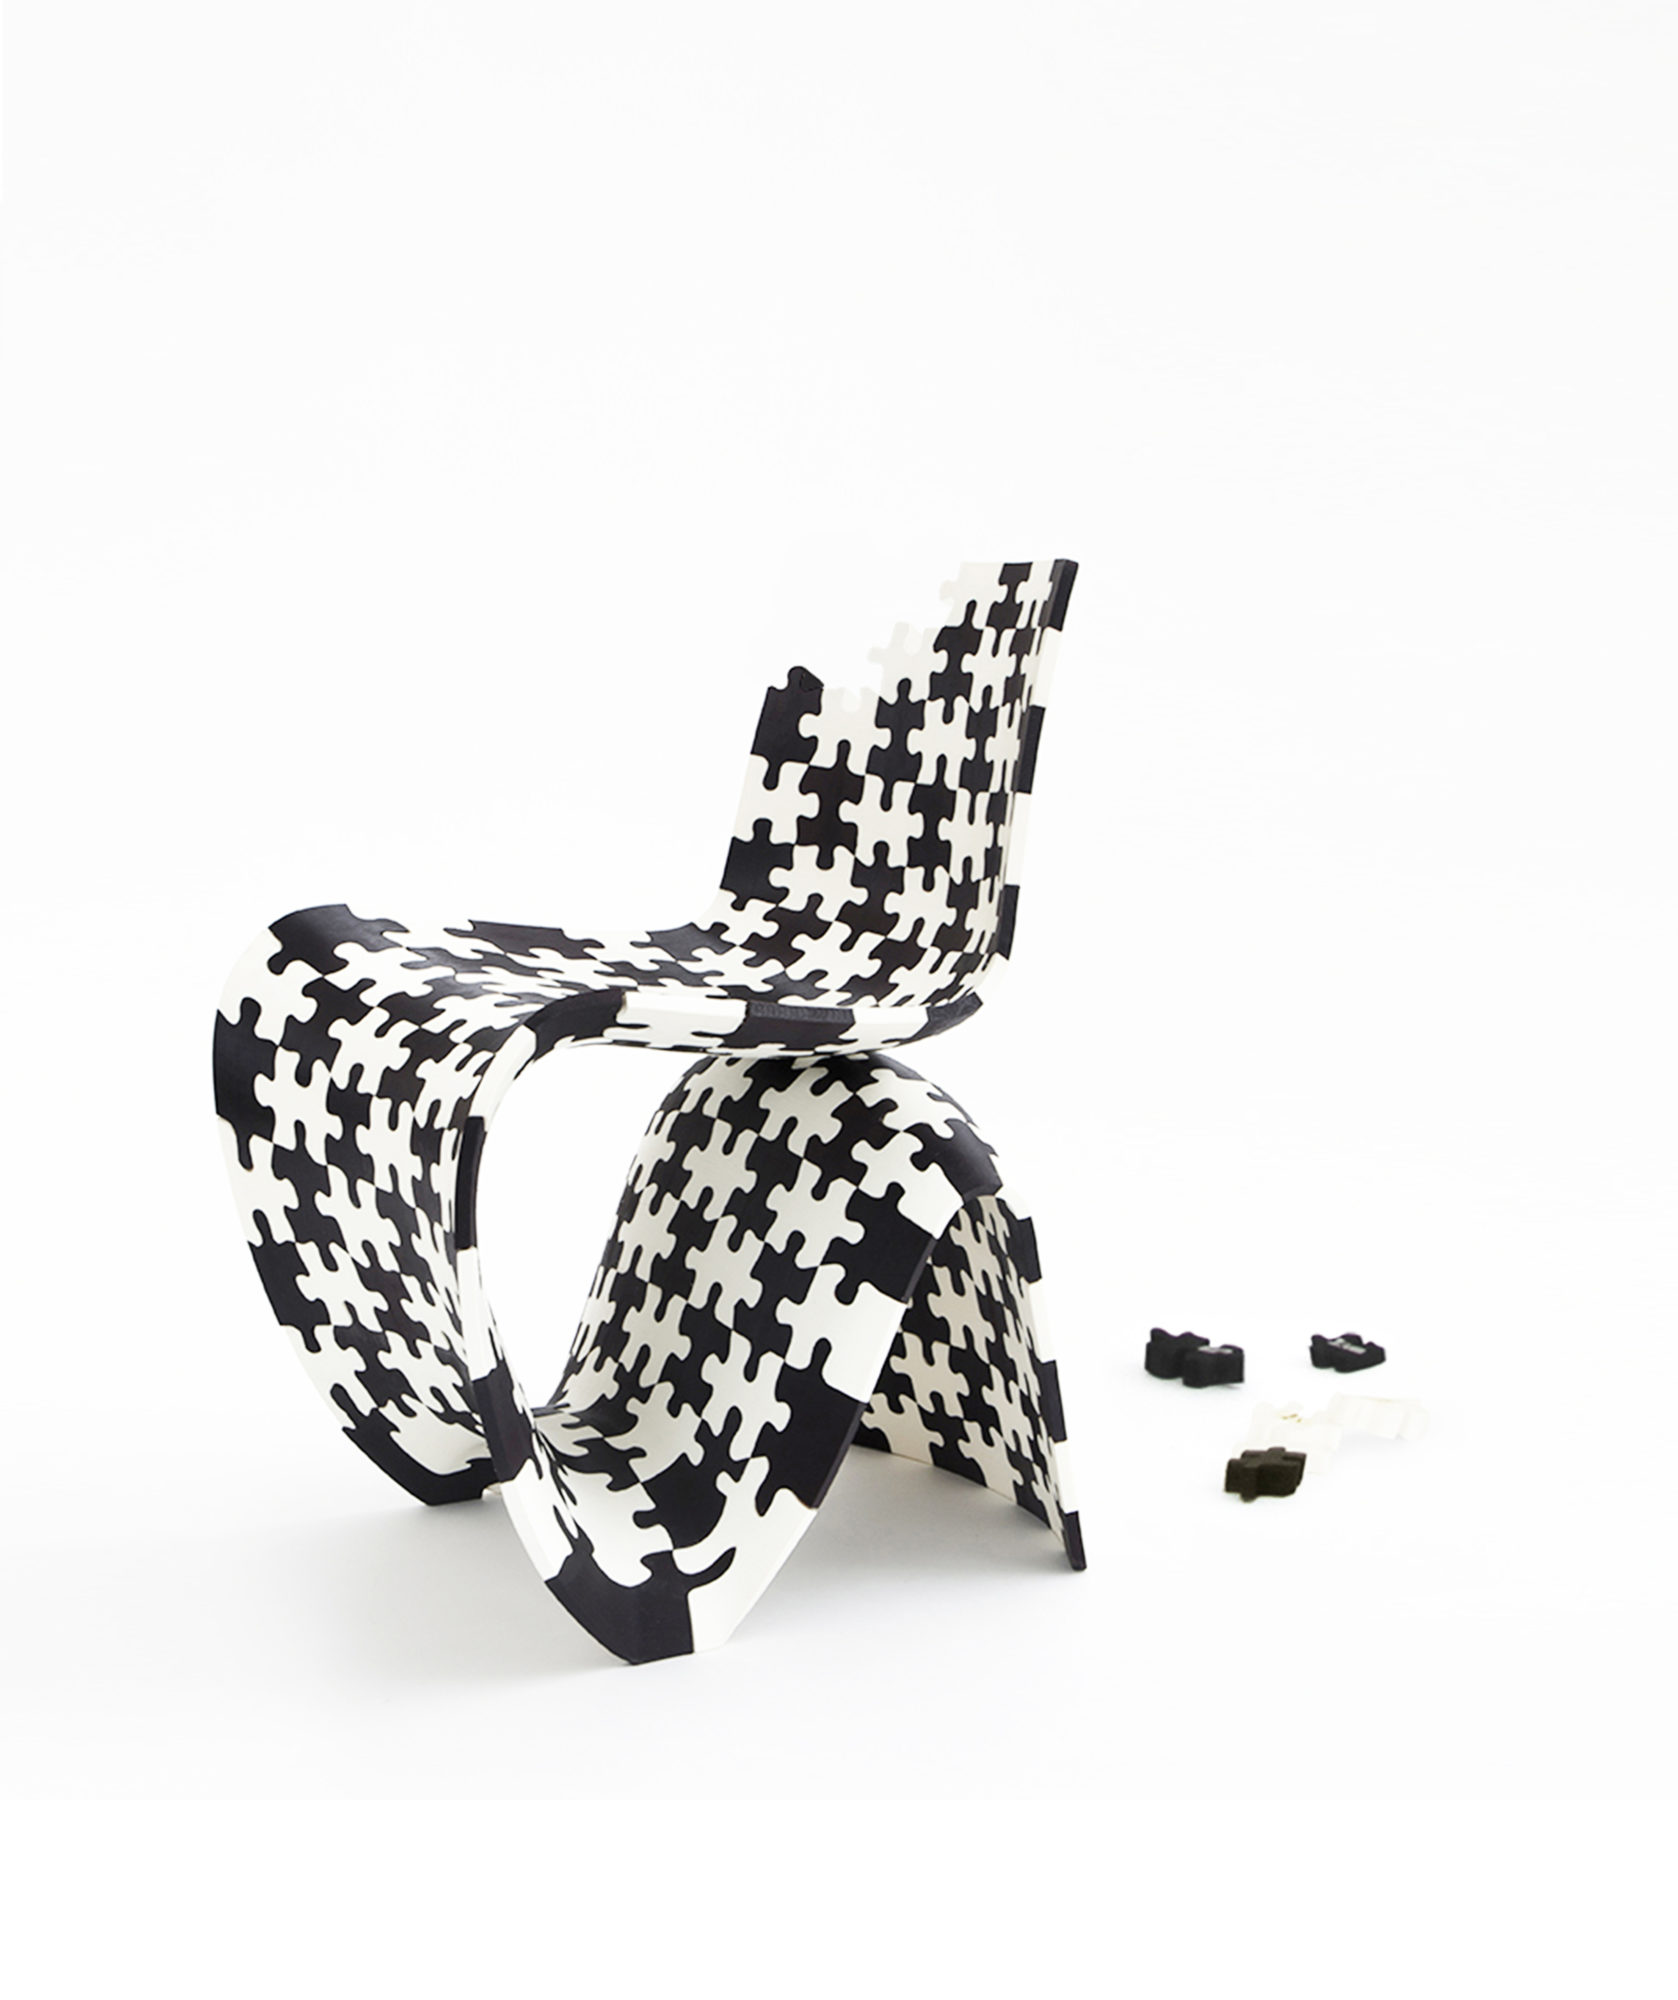 a black and white chair made up of puzzle pieces, with a few missing from a corner